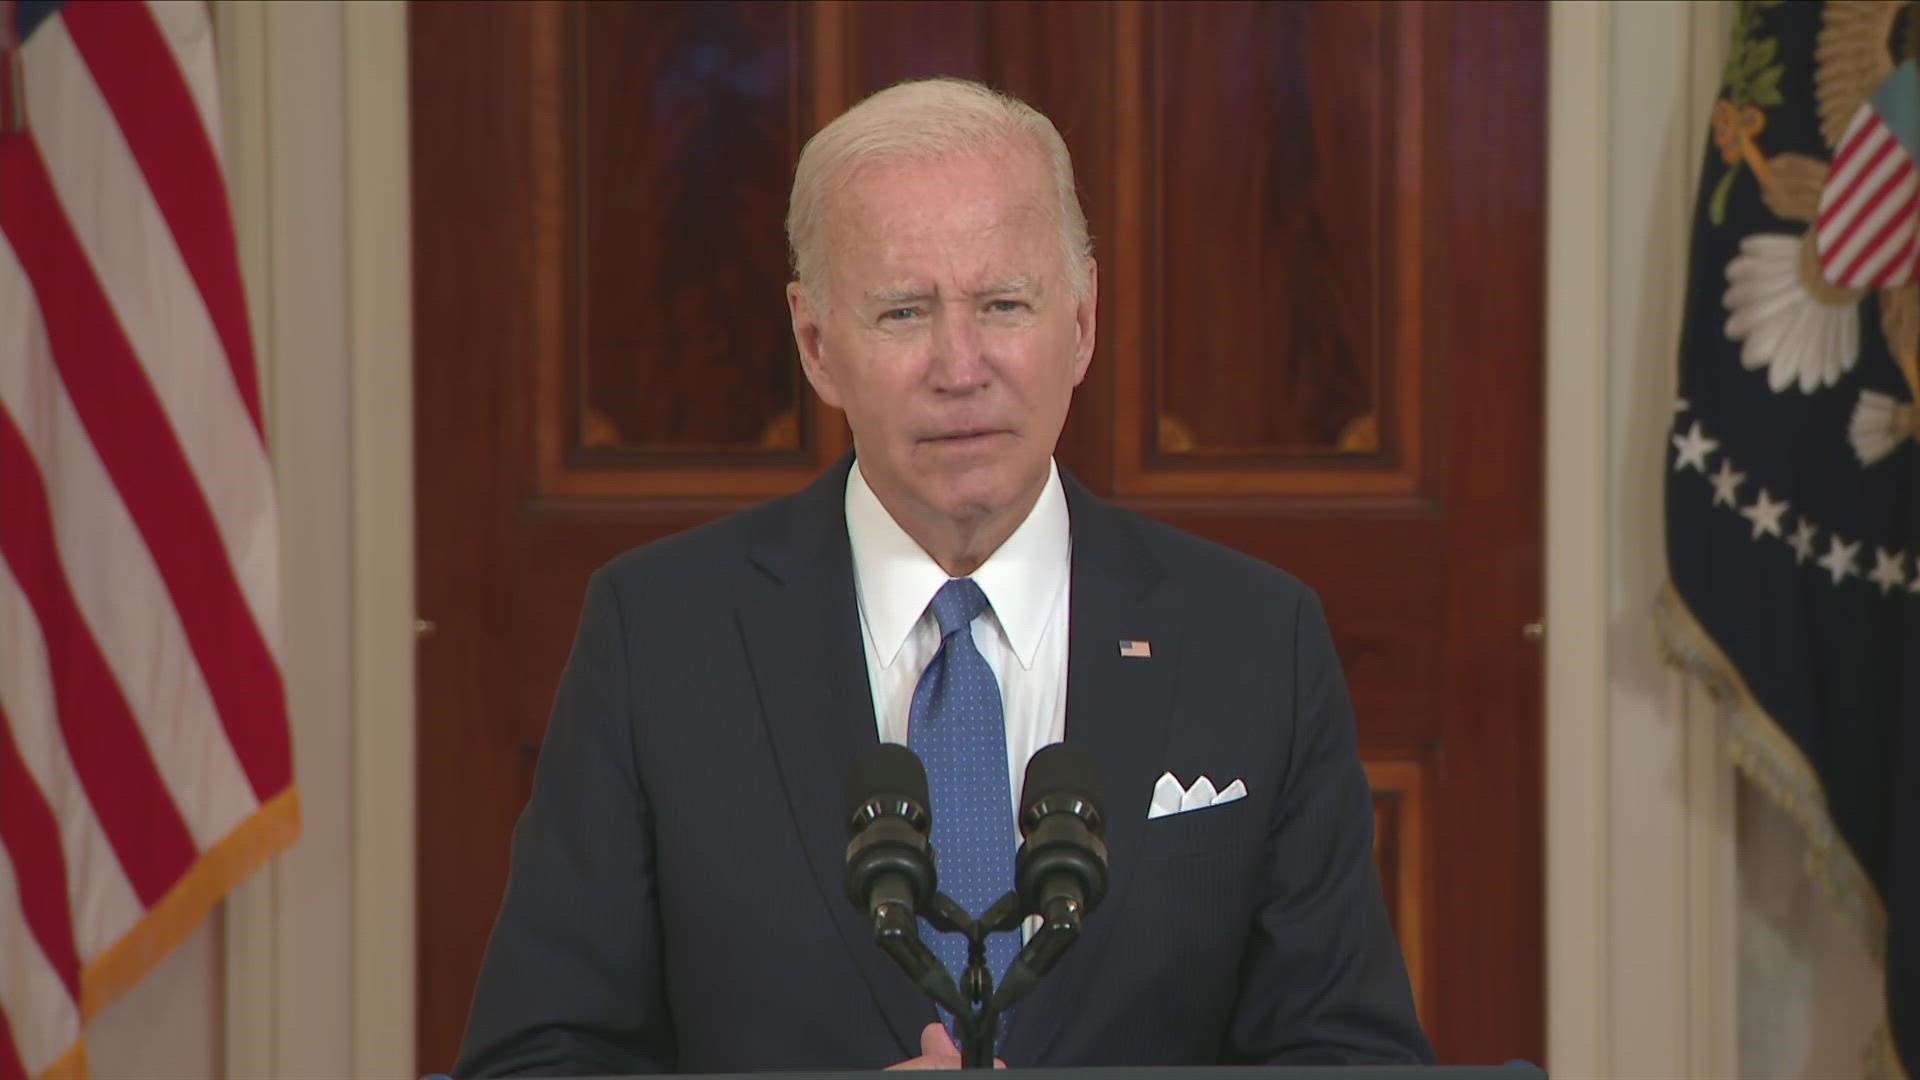 President Joe Biden warned that "the health and life of women in the nation are now at risk."